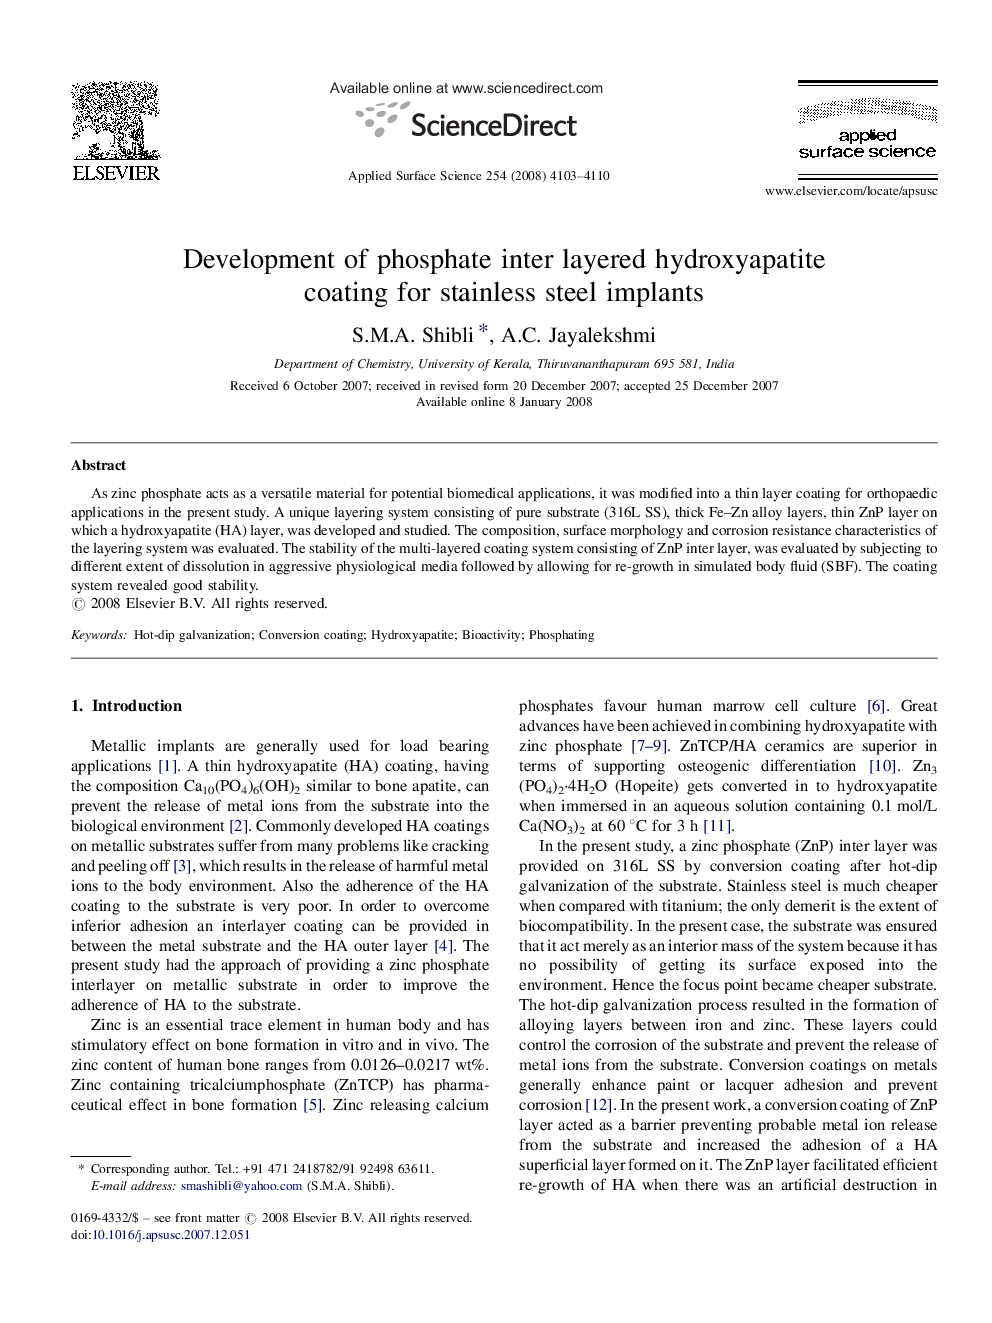 Development of phosphate inter layered hydroxyapatite coating for stainless steel implants